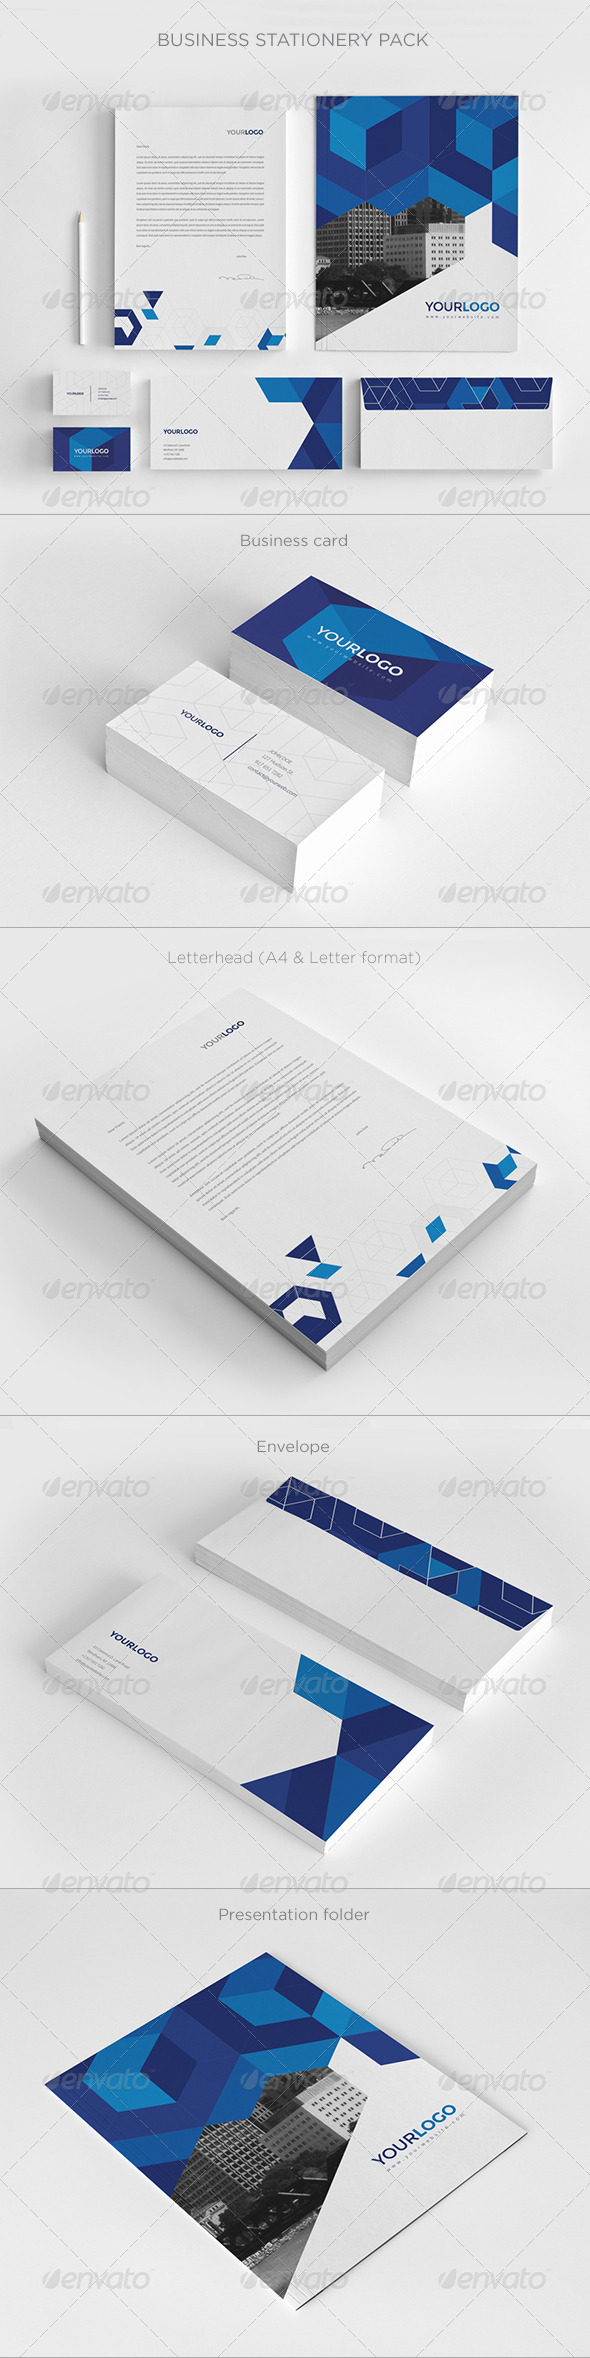 GraphicRiver Business Stationery Pack 7596178